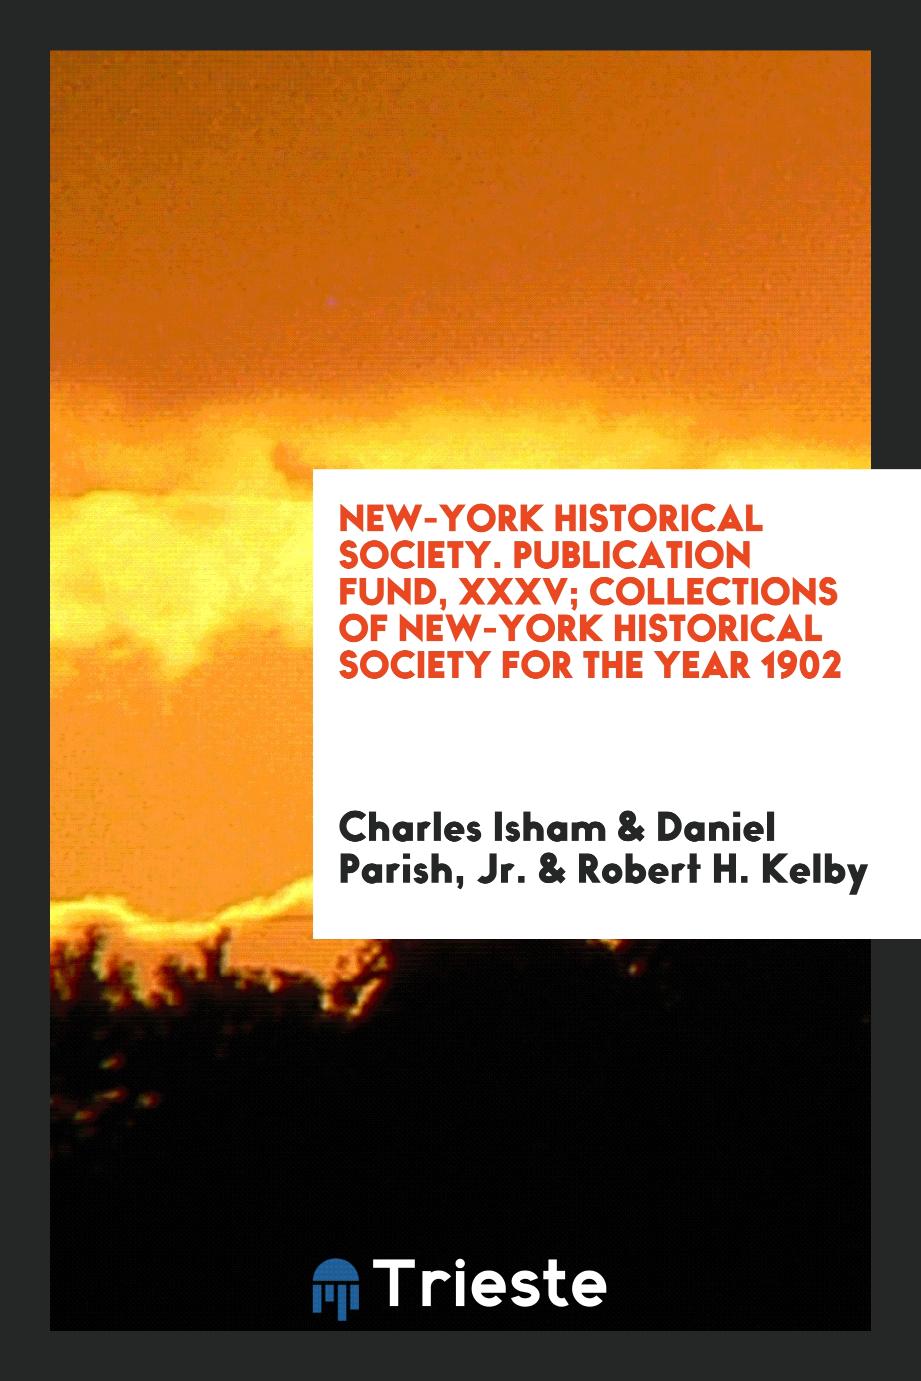 New-York Historical Society. Publication Fund, XXXV; Collections of New-York Historical Society for the Year 1902